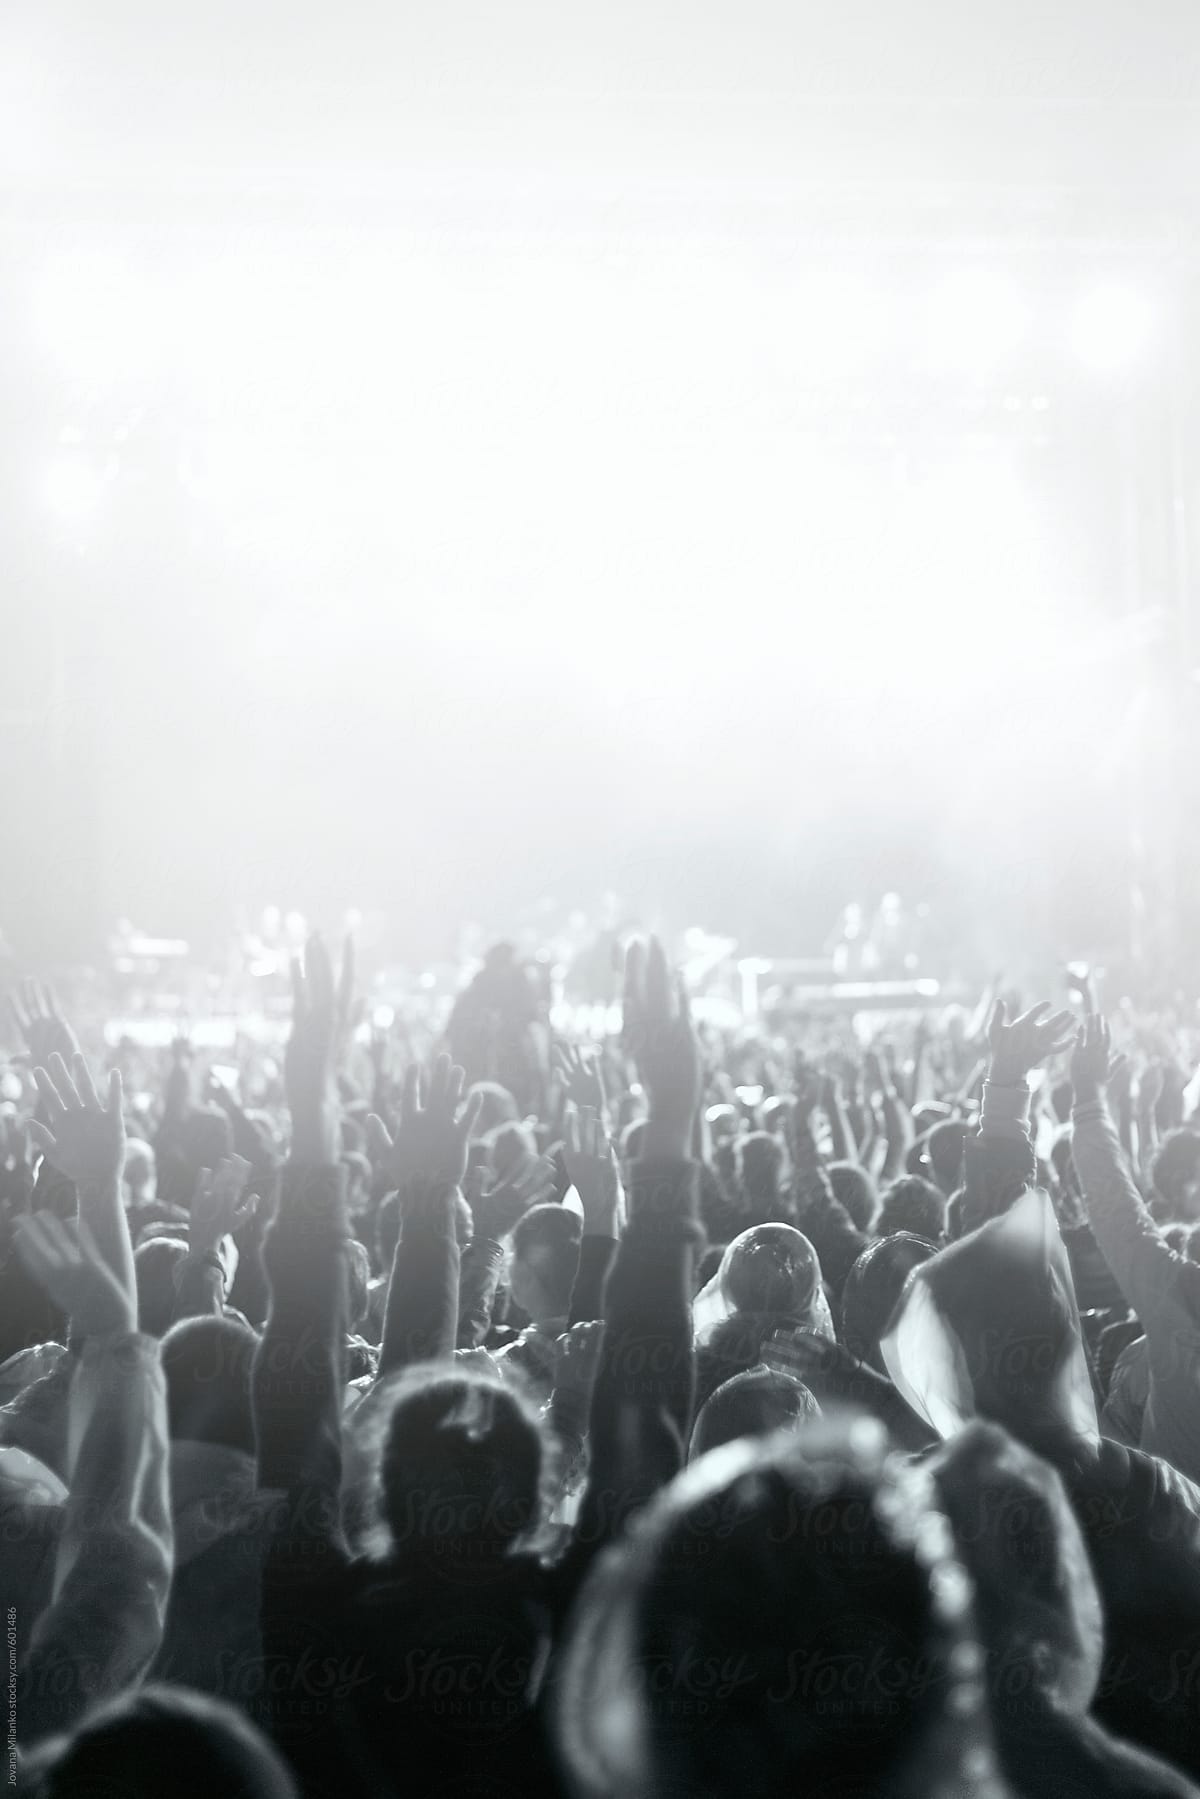 Audience in Music Festival